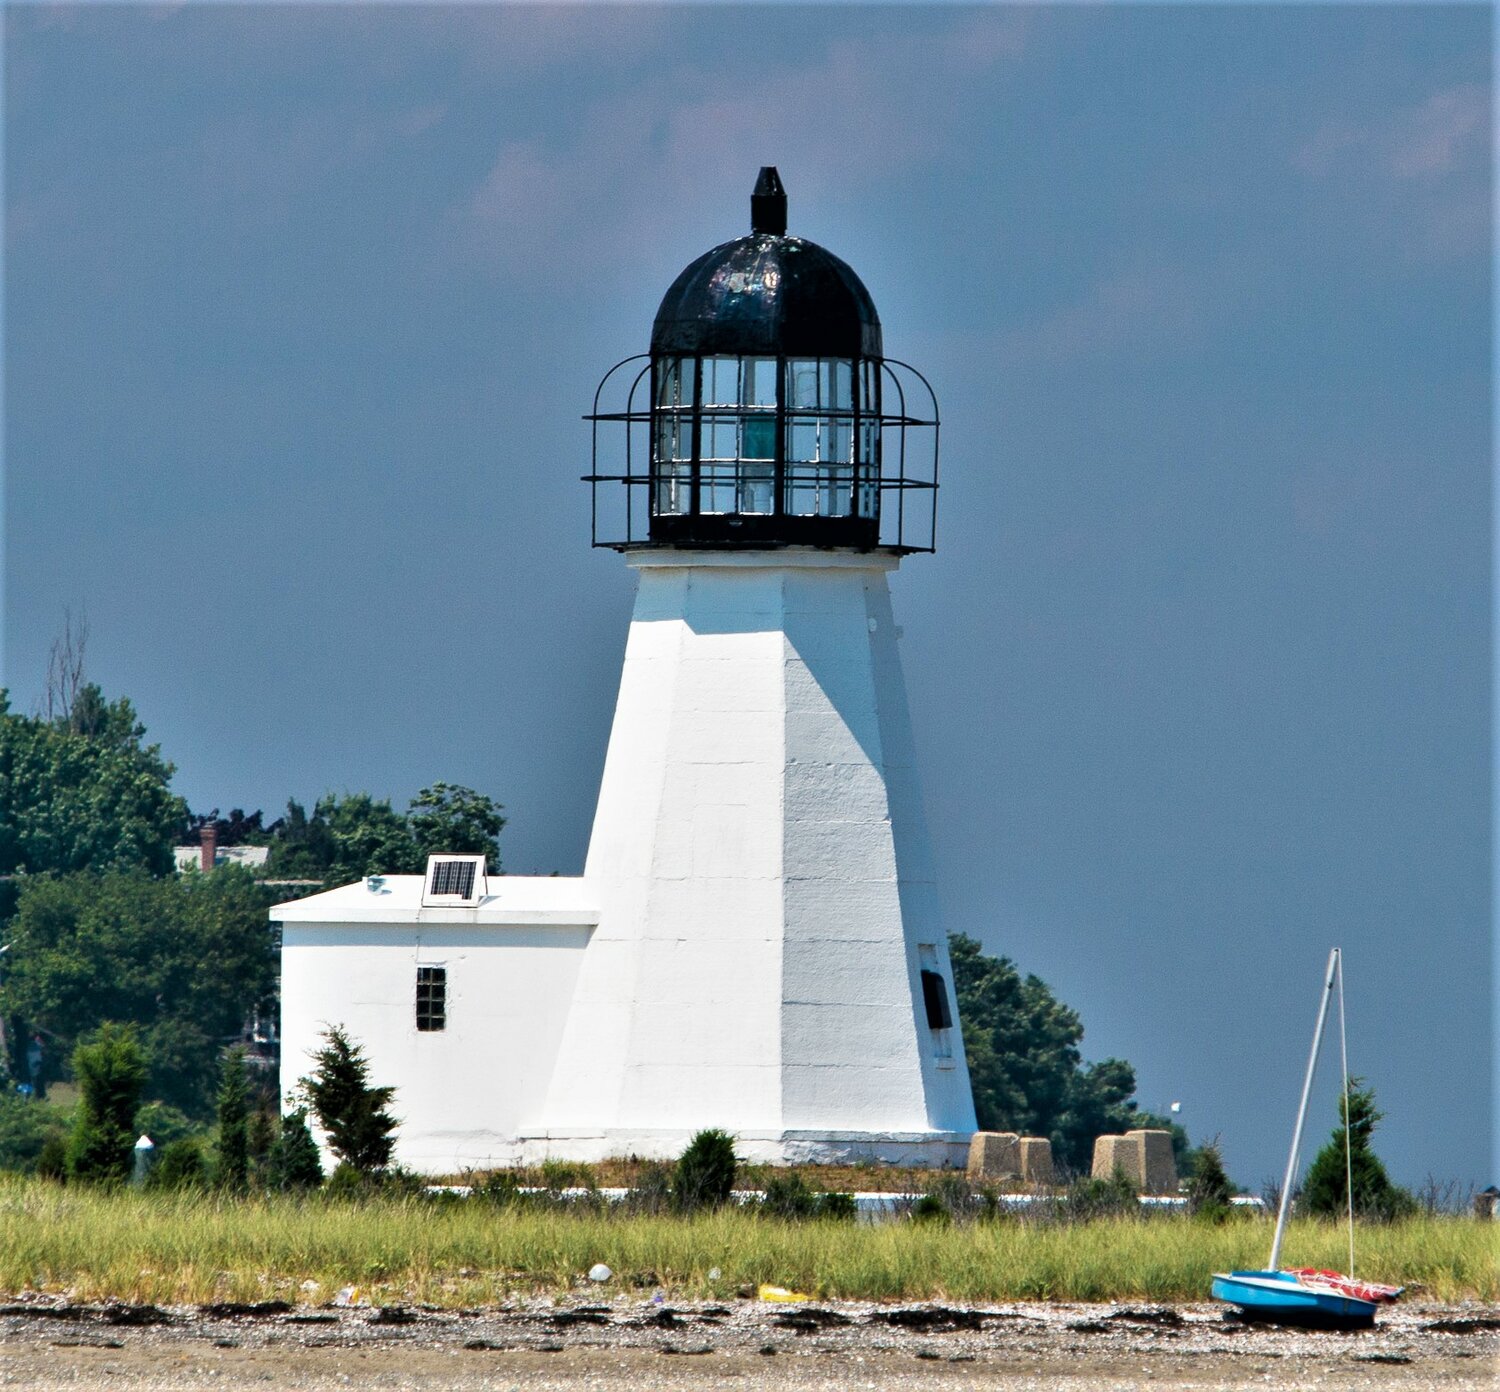 Sandy Point Lighthouse on Prudence Island will be turned over to the Prudence Conservancy, according to U.S. Sen. Jack Reed.